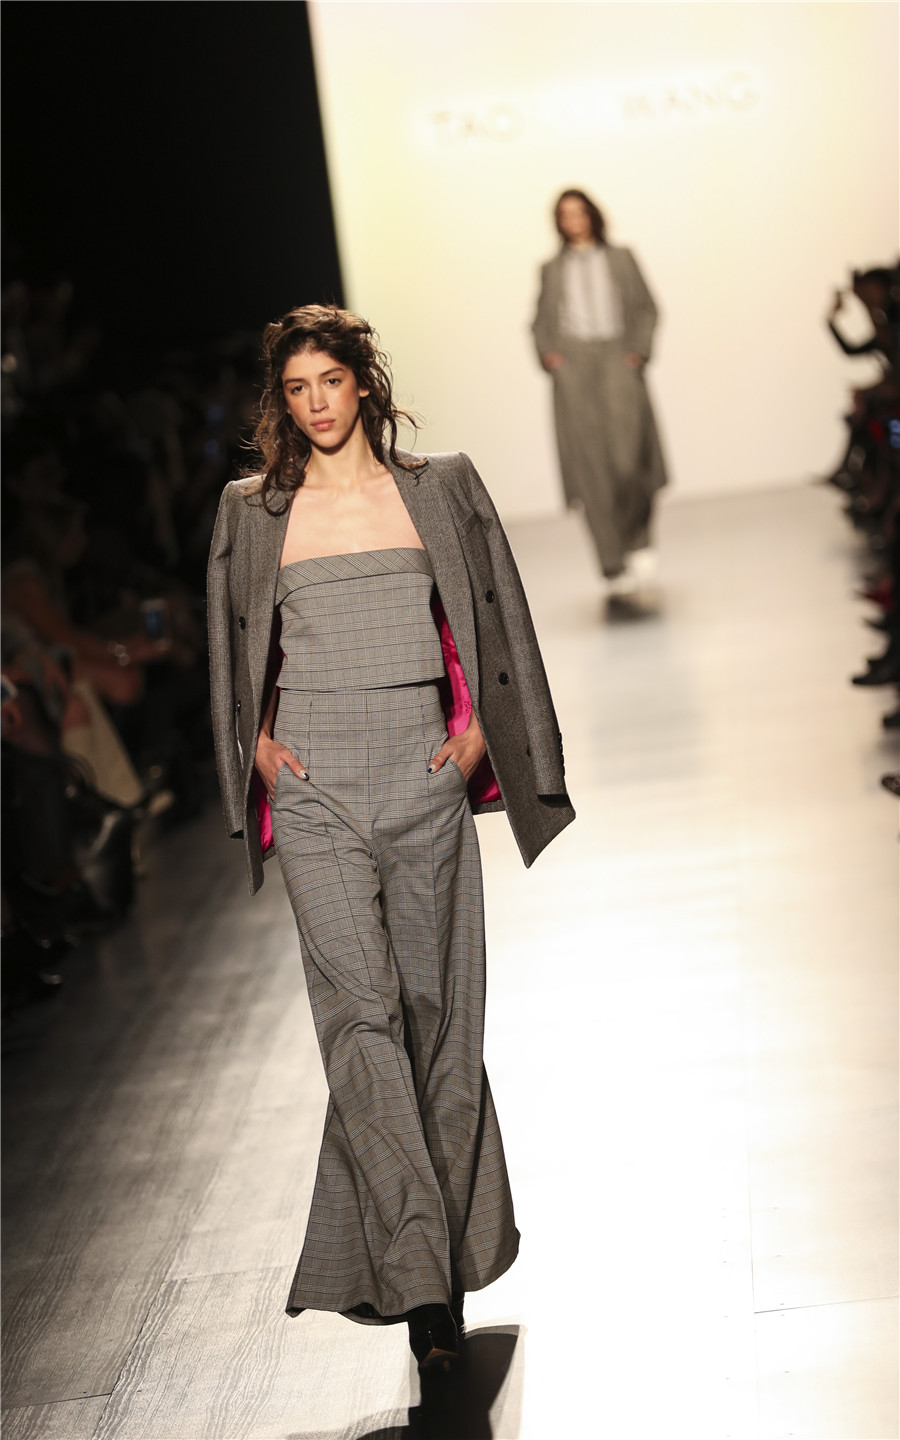 Creations of Taoray Wang presented in NYC